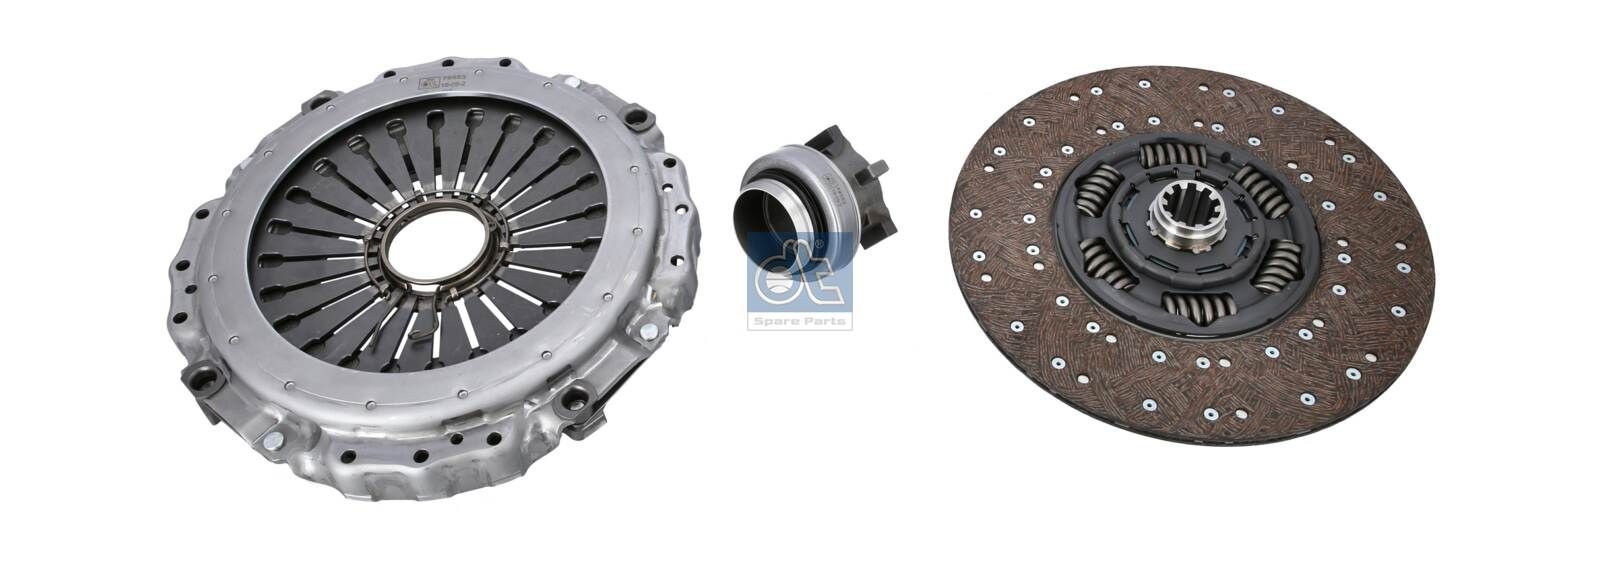 827416 DT Spare Parts 430mm Ø: 430mm Clutch replacement kit 7.90516 buy